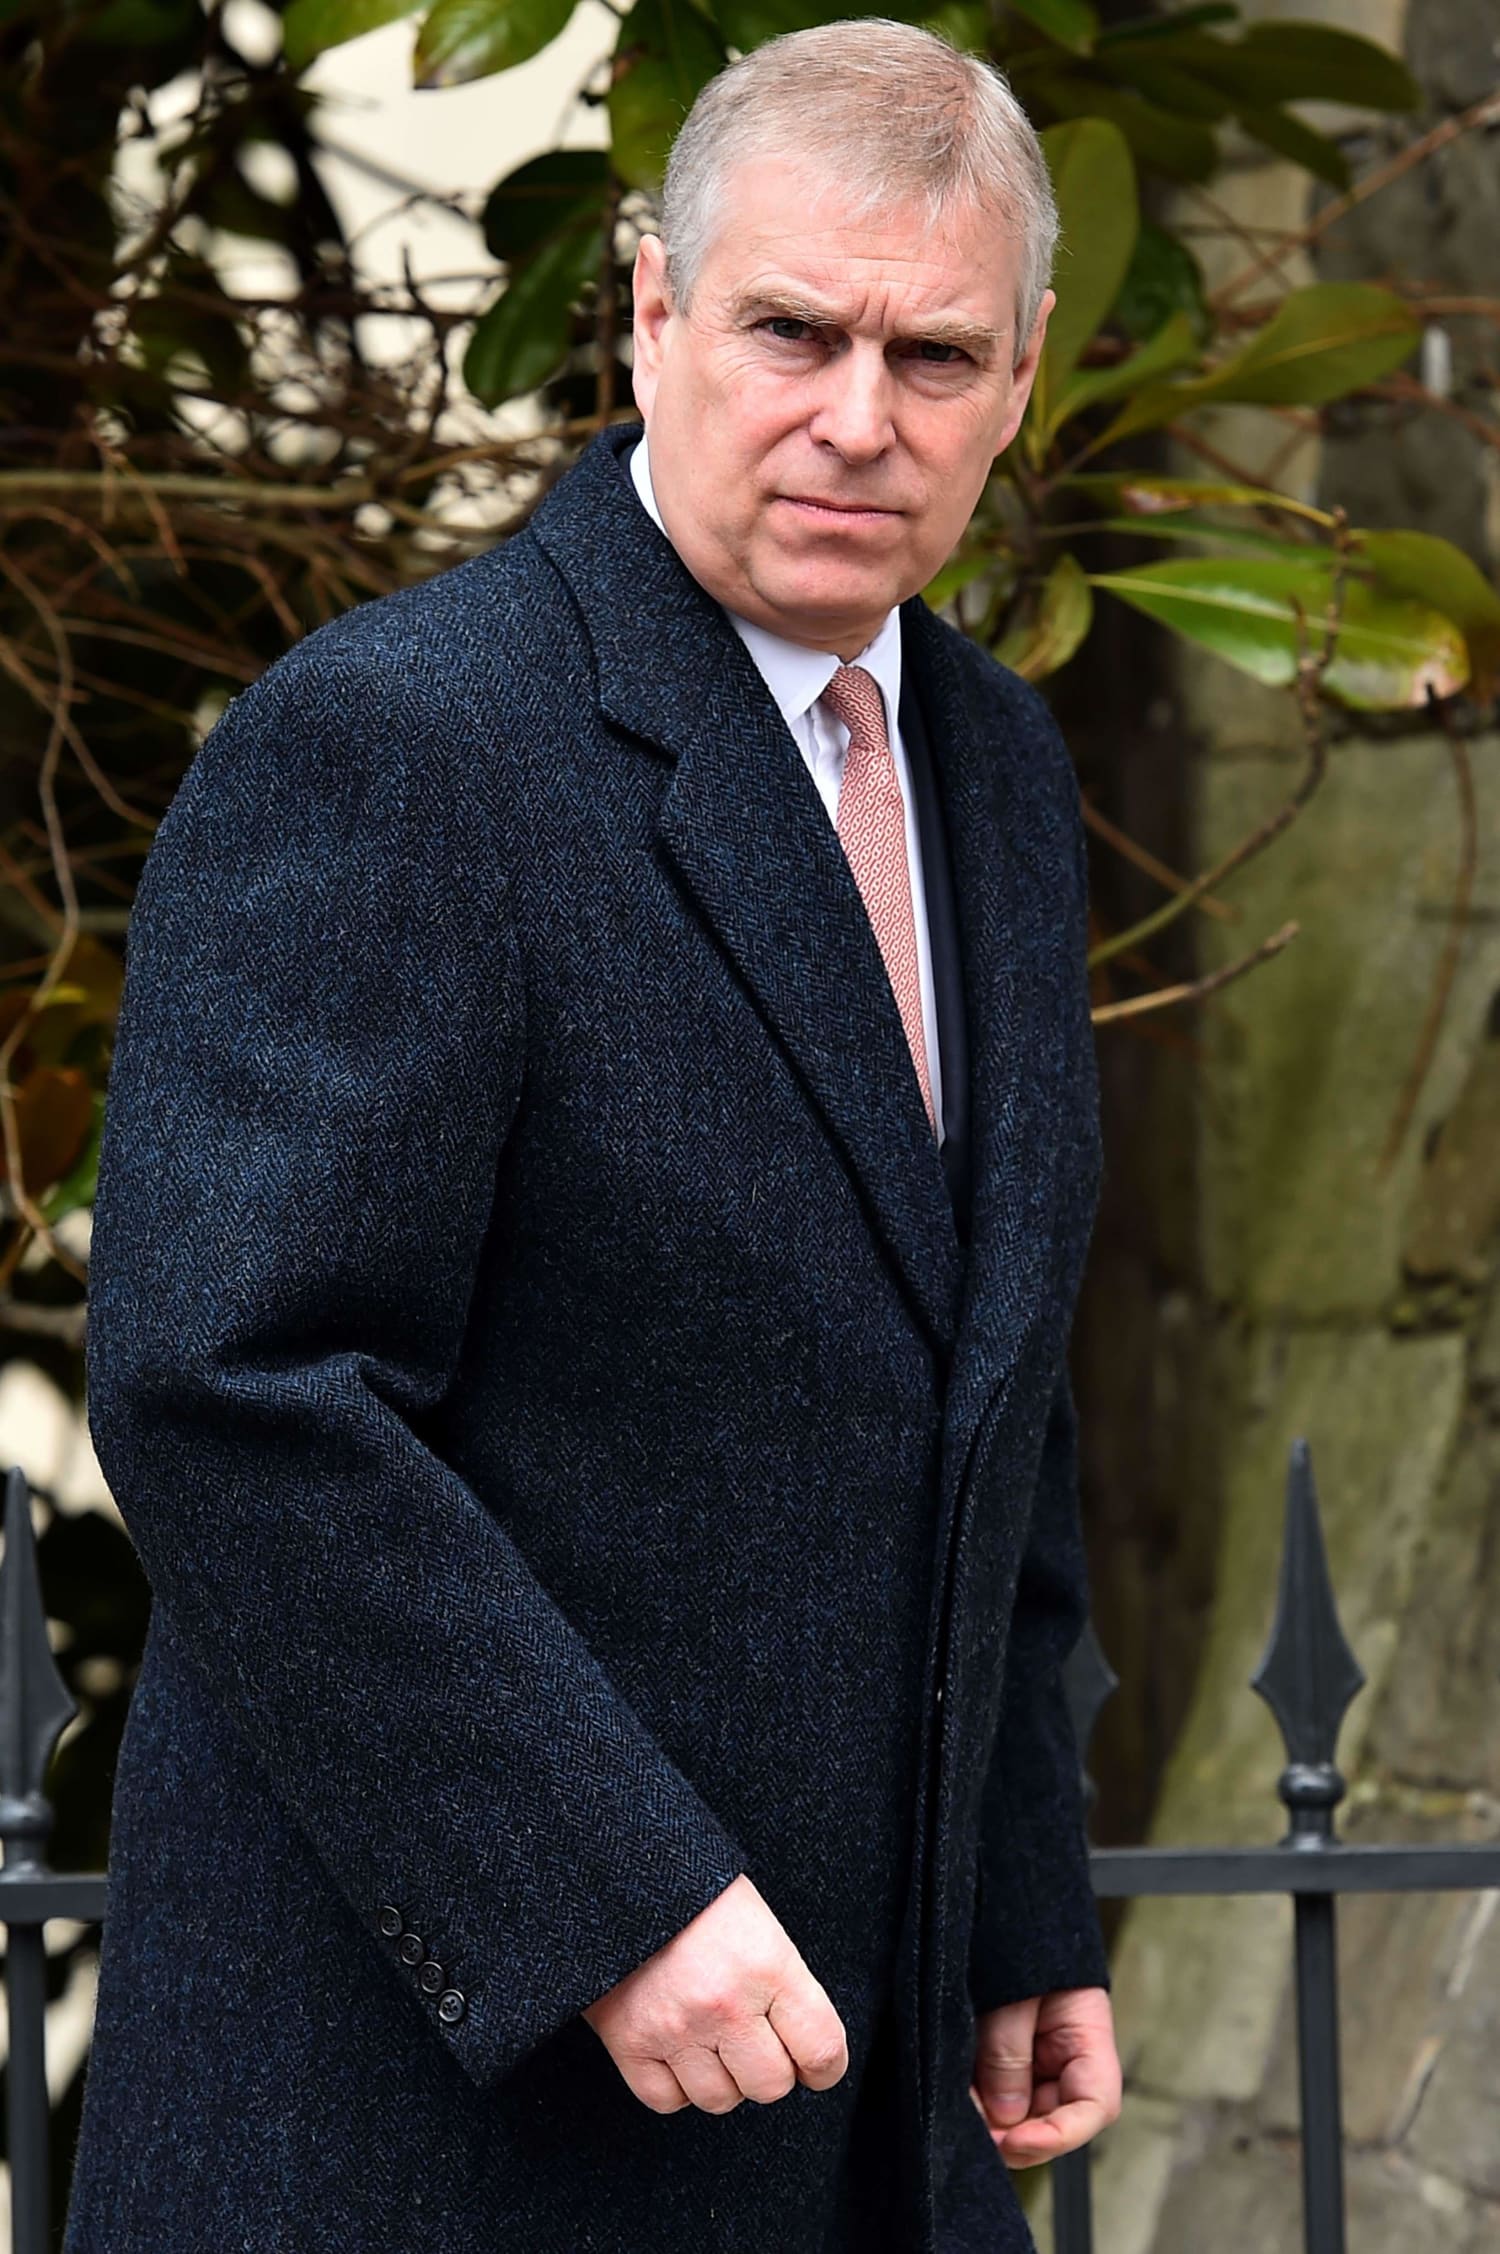 Prince Andrew's Underage Sex Accuser Cannot Join Lawsuit: Judge - NBC News